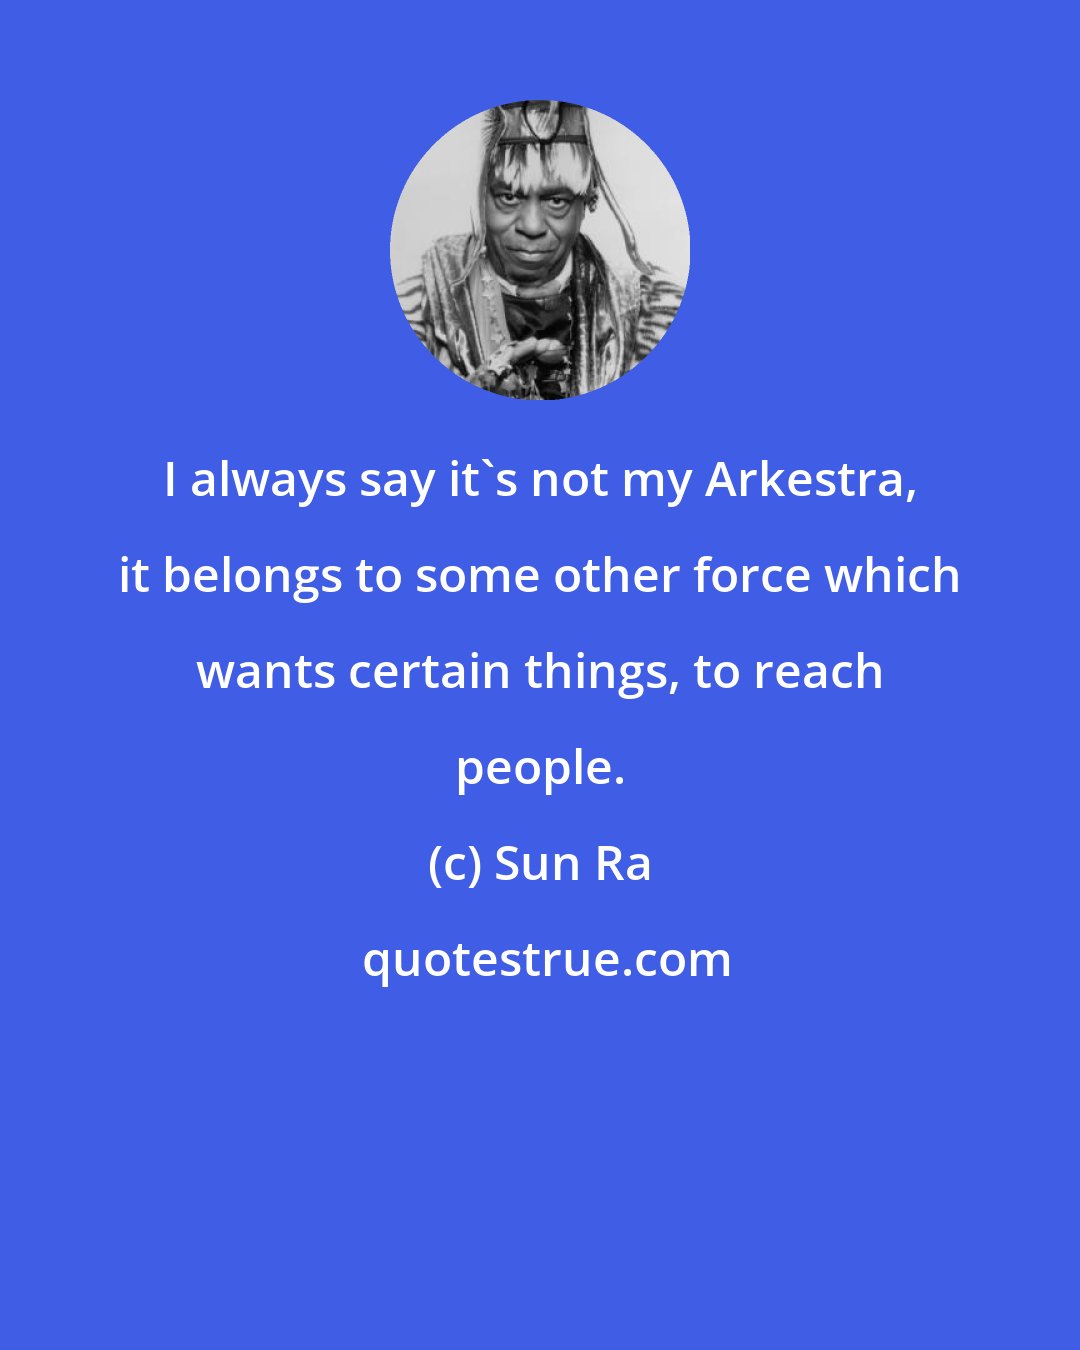 Sun Ra: I always say it's not my Arkestra, it belongs to some other force which wants certain things, to reach people.